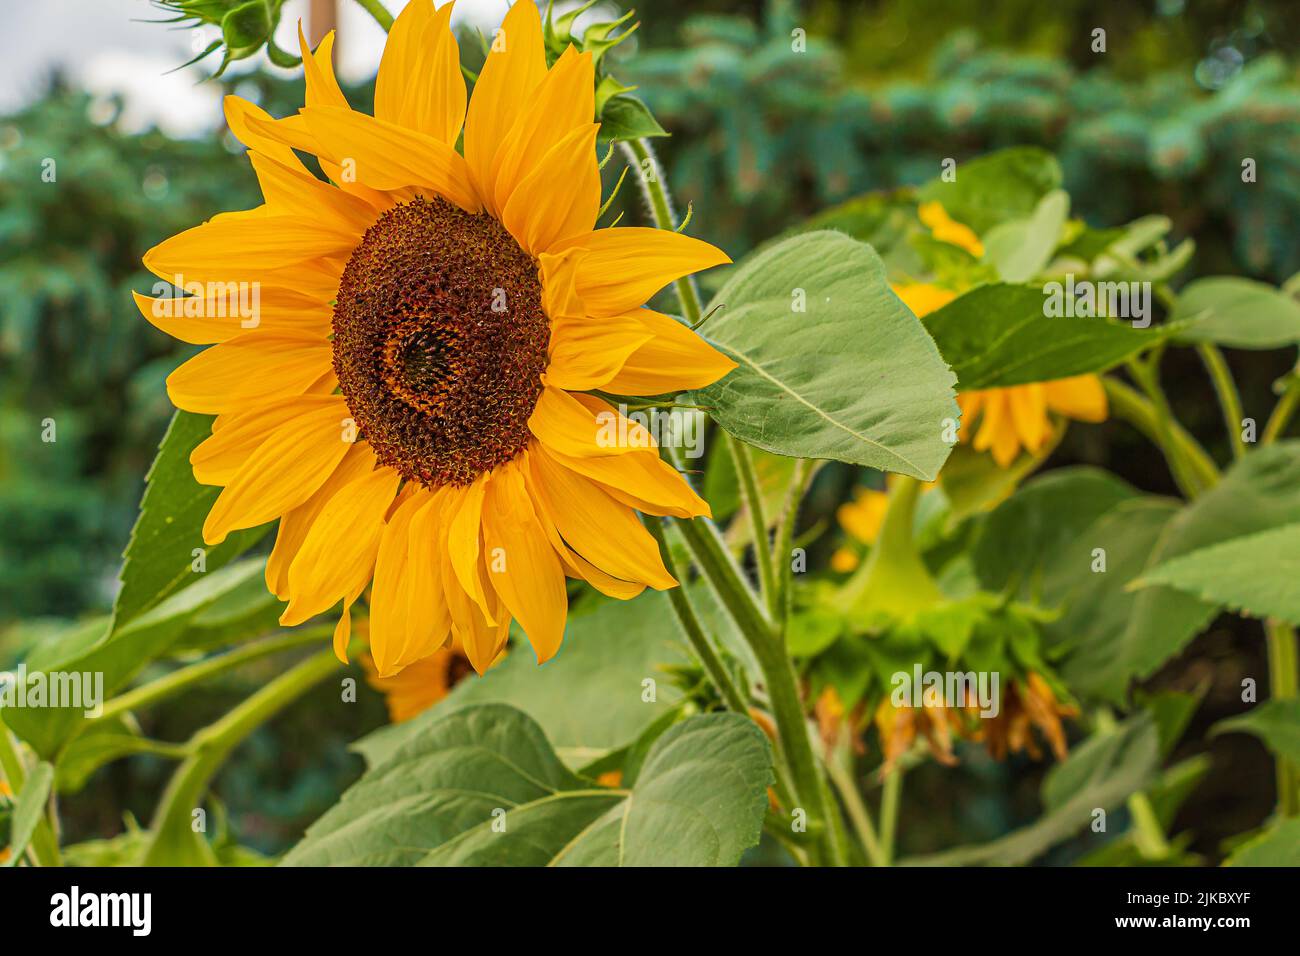 side view of a large sunflower in a garden. Details of a flower open blossom. Sunflower seeds inside the flower head. Yellow flower petals and green Stock Photo